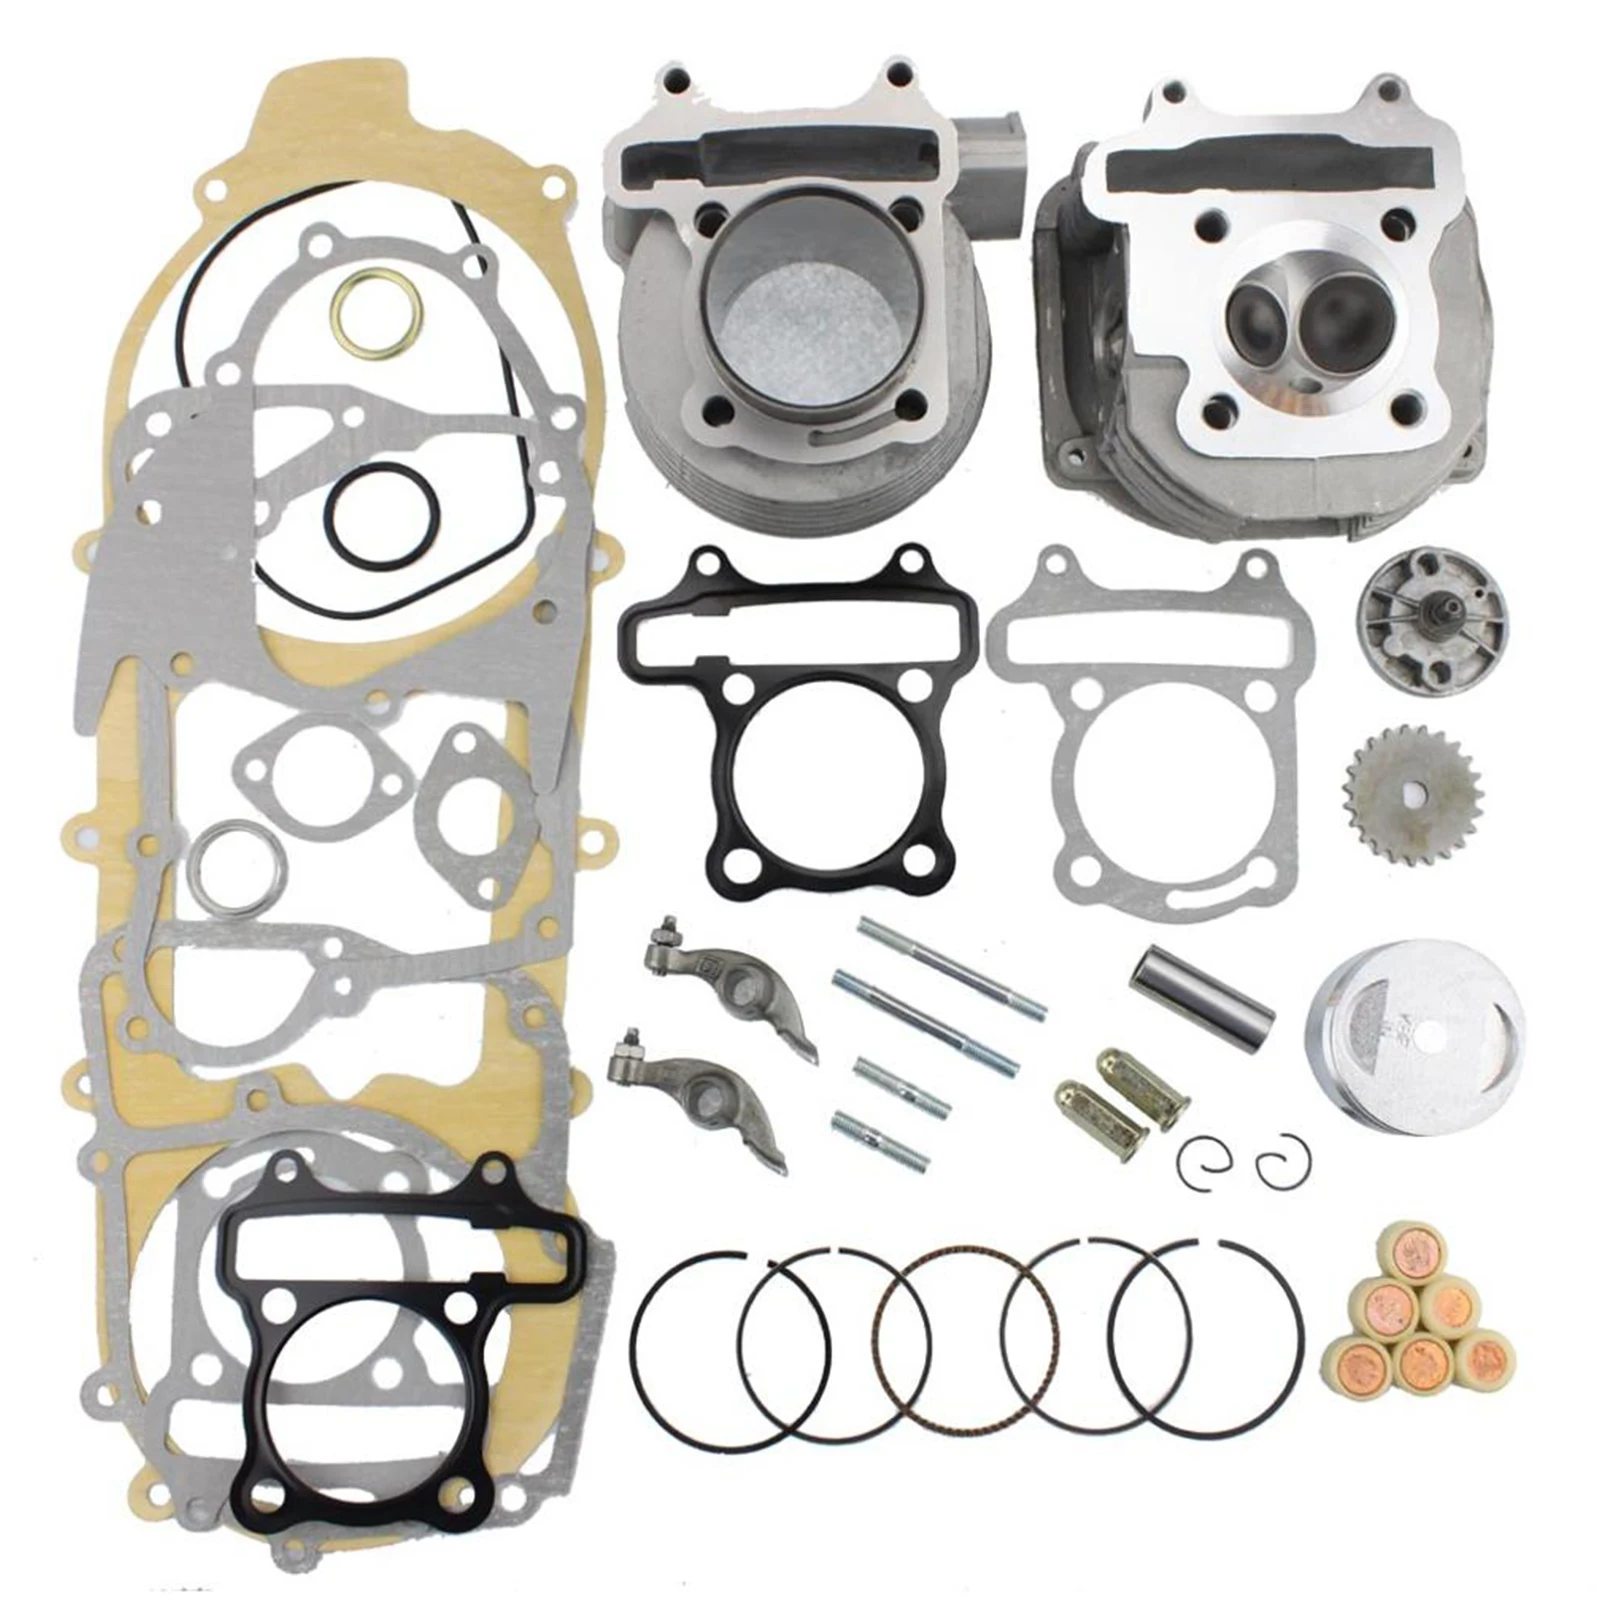 150cc 157QMJ 152QMI Big Bore Rebuild Kit for quads go-karts motorcycles head chinese scooter GOOFIT 57.4mm Cylinder Engine Cylinder Heads Kit GY6 4 Stroke 125cc 